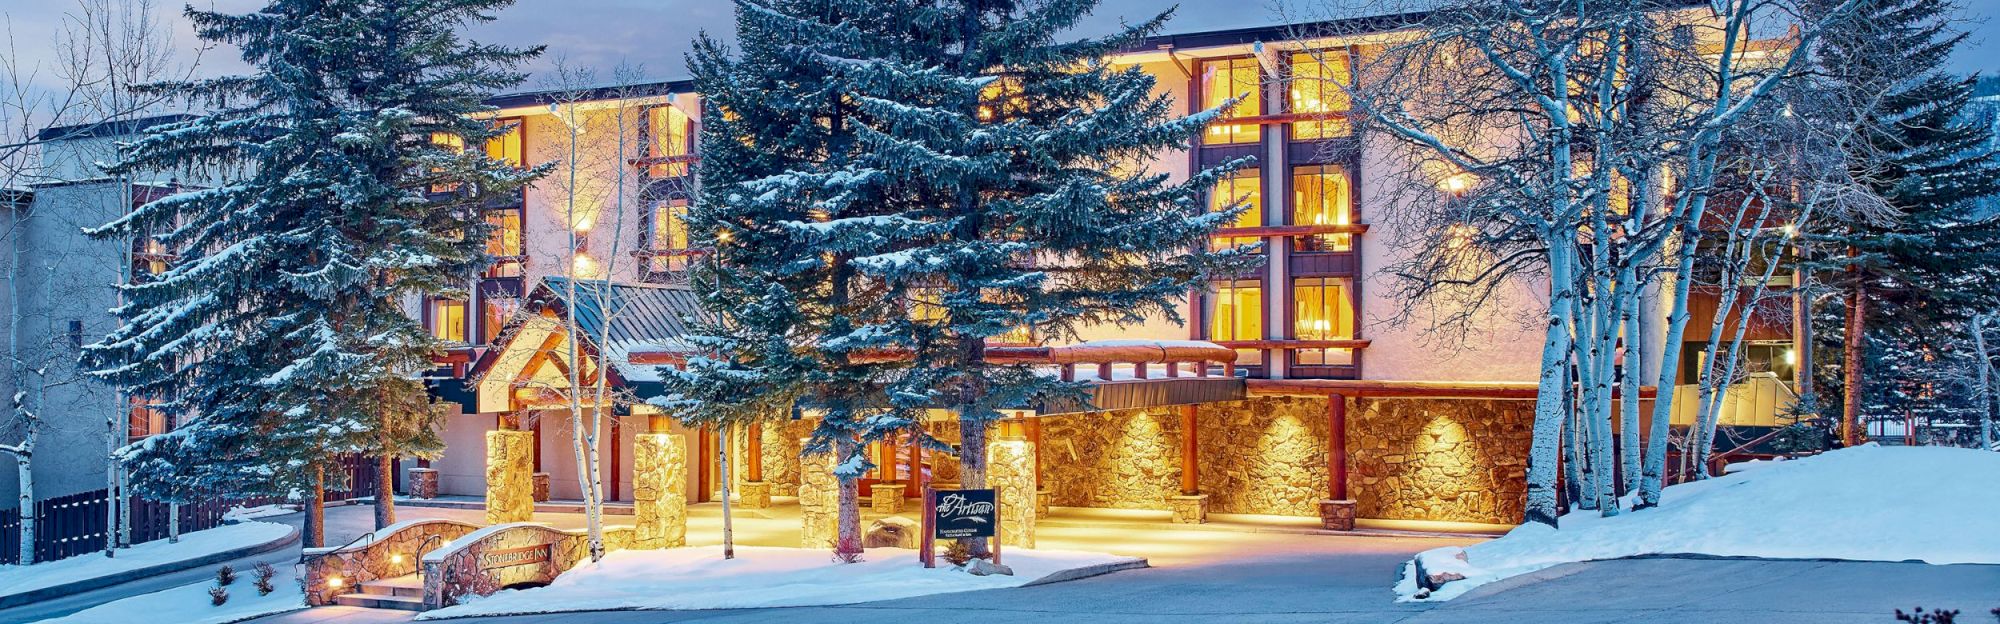 The image shows a beautifully lit building surrounded by snow and trees, likely a hotel or lodge, with a welcoming entrance and cozy ambiance.